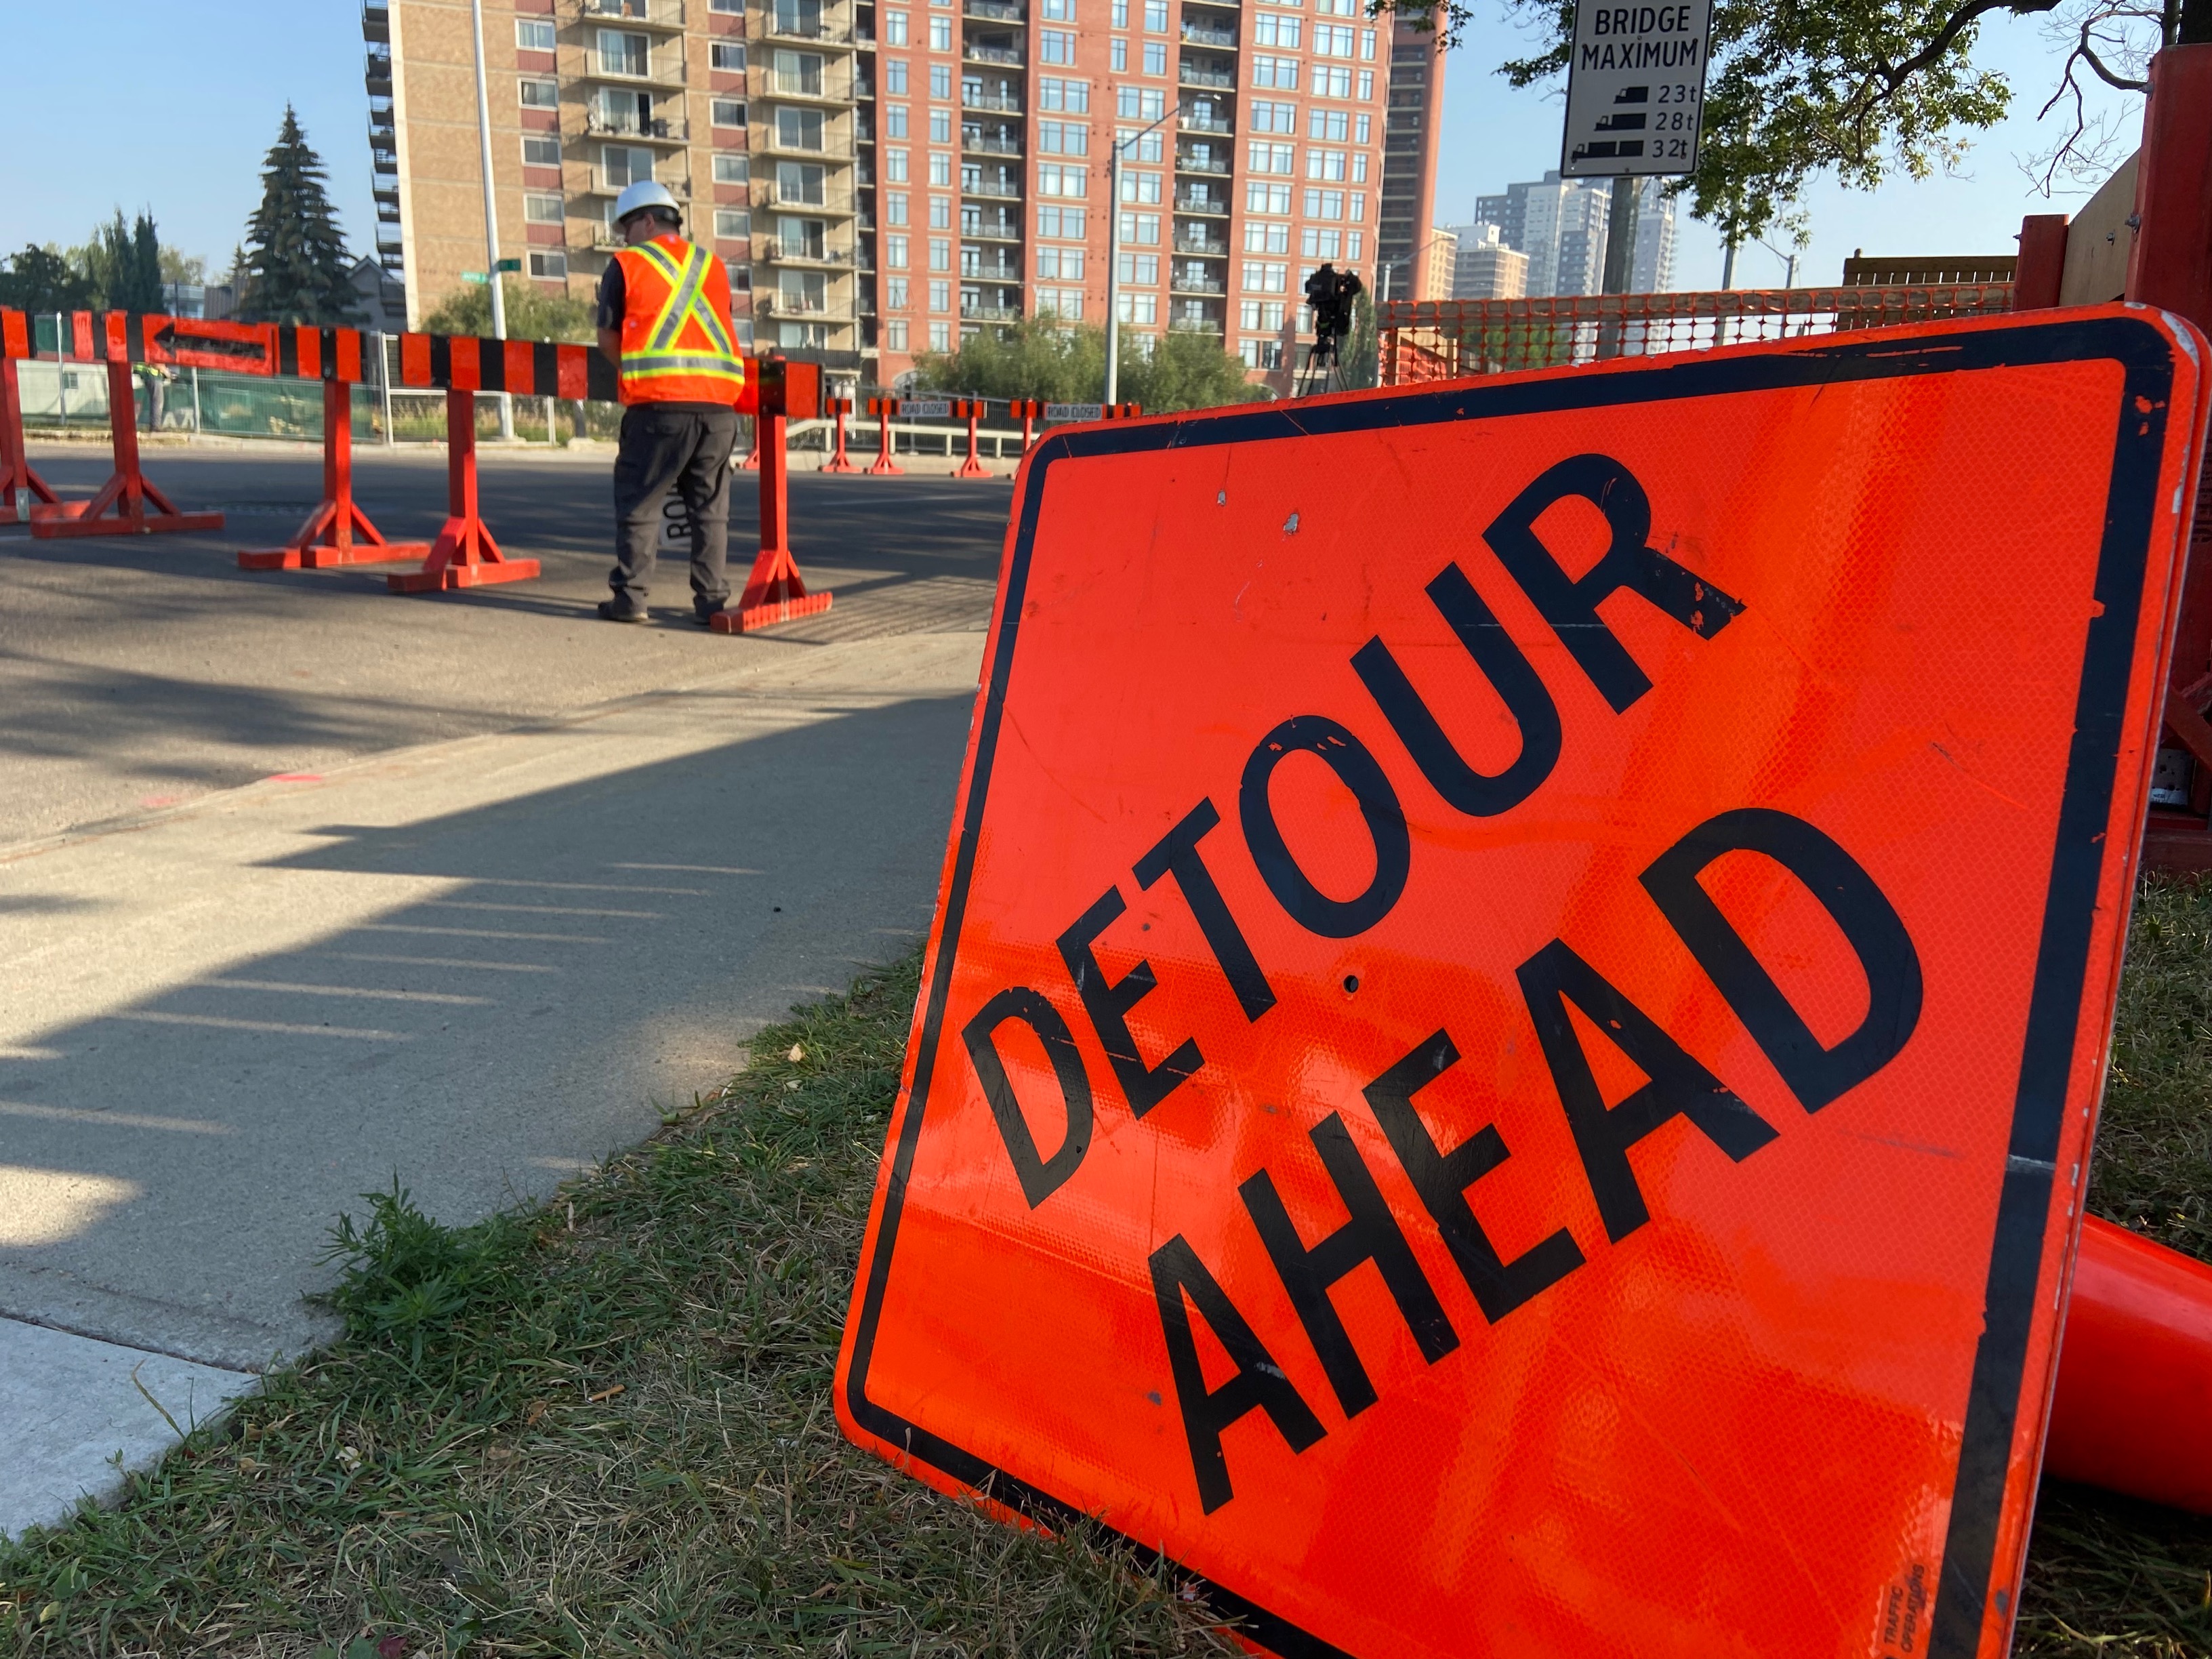 City of Edmonton gives end-of-season construction update